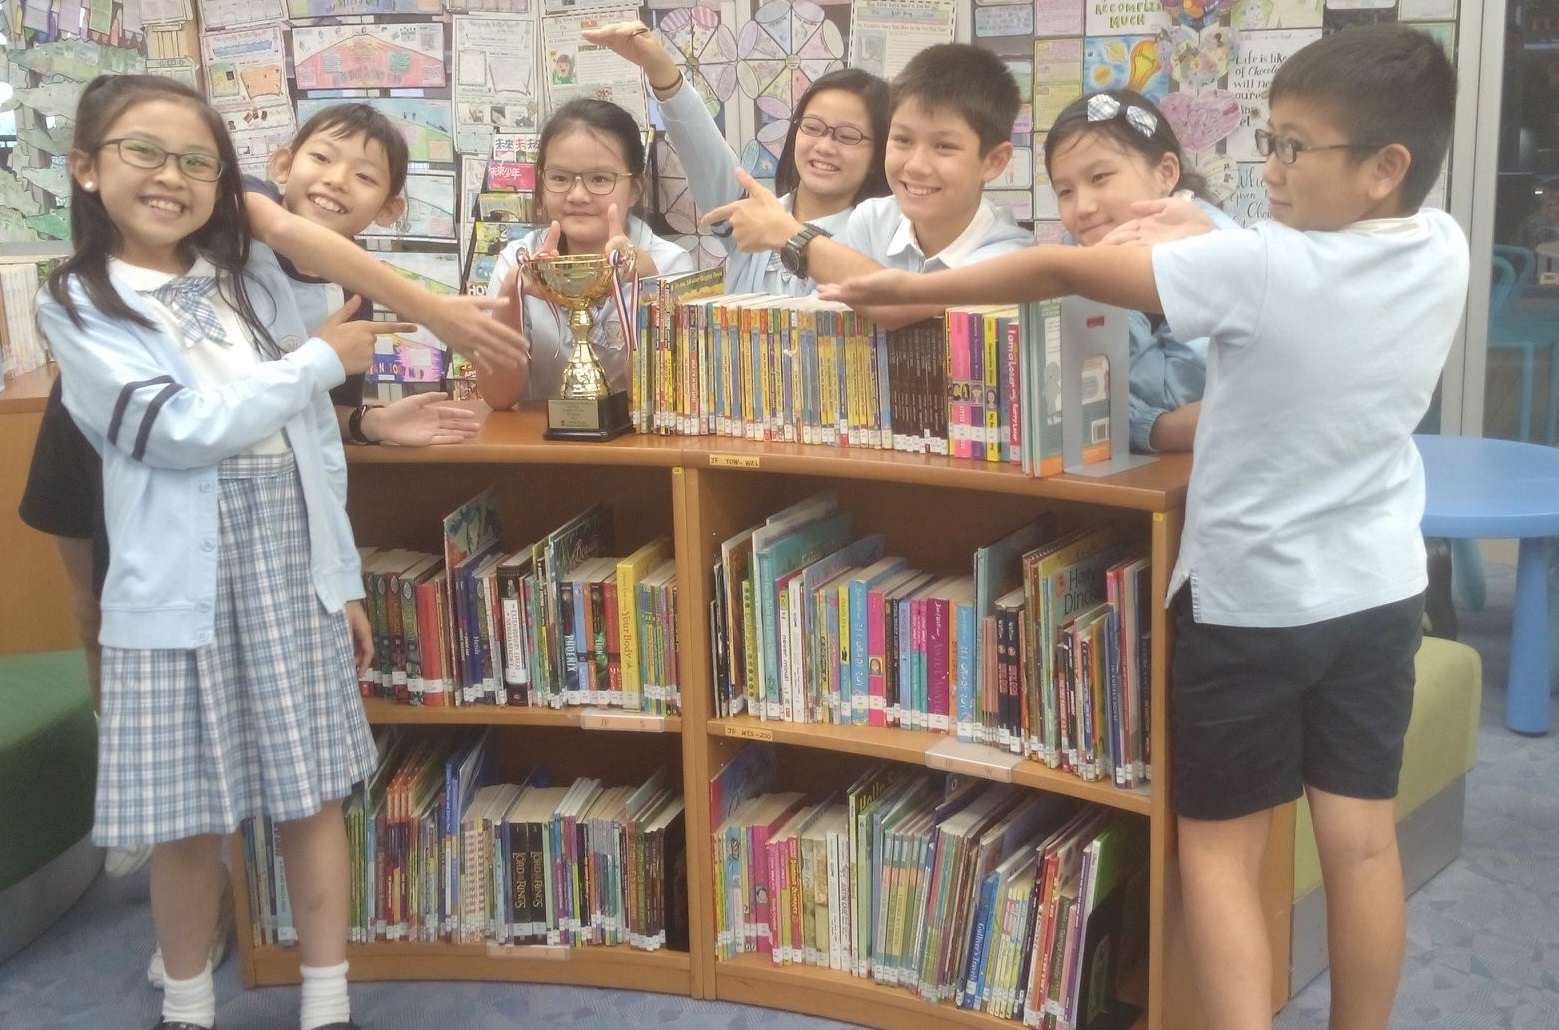 Hong Kong Battle of the Books (Modified Primary) winners 2017-18